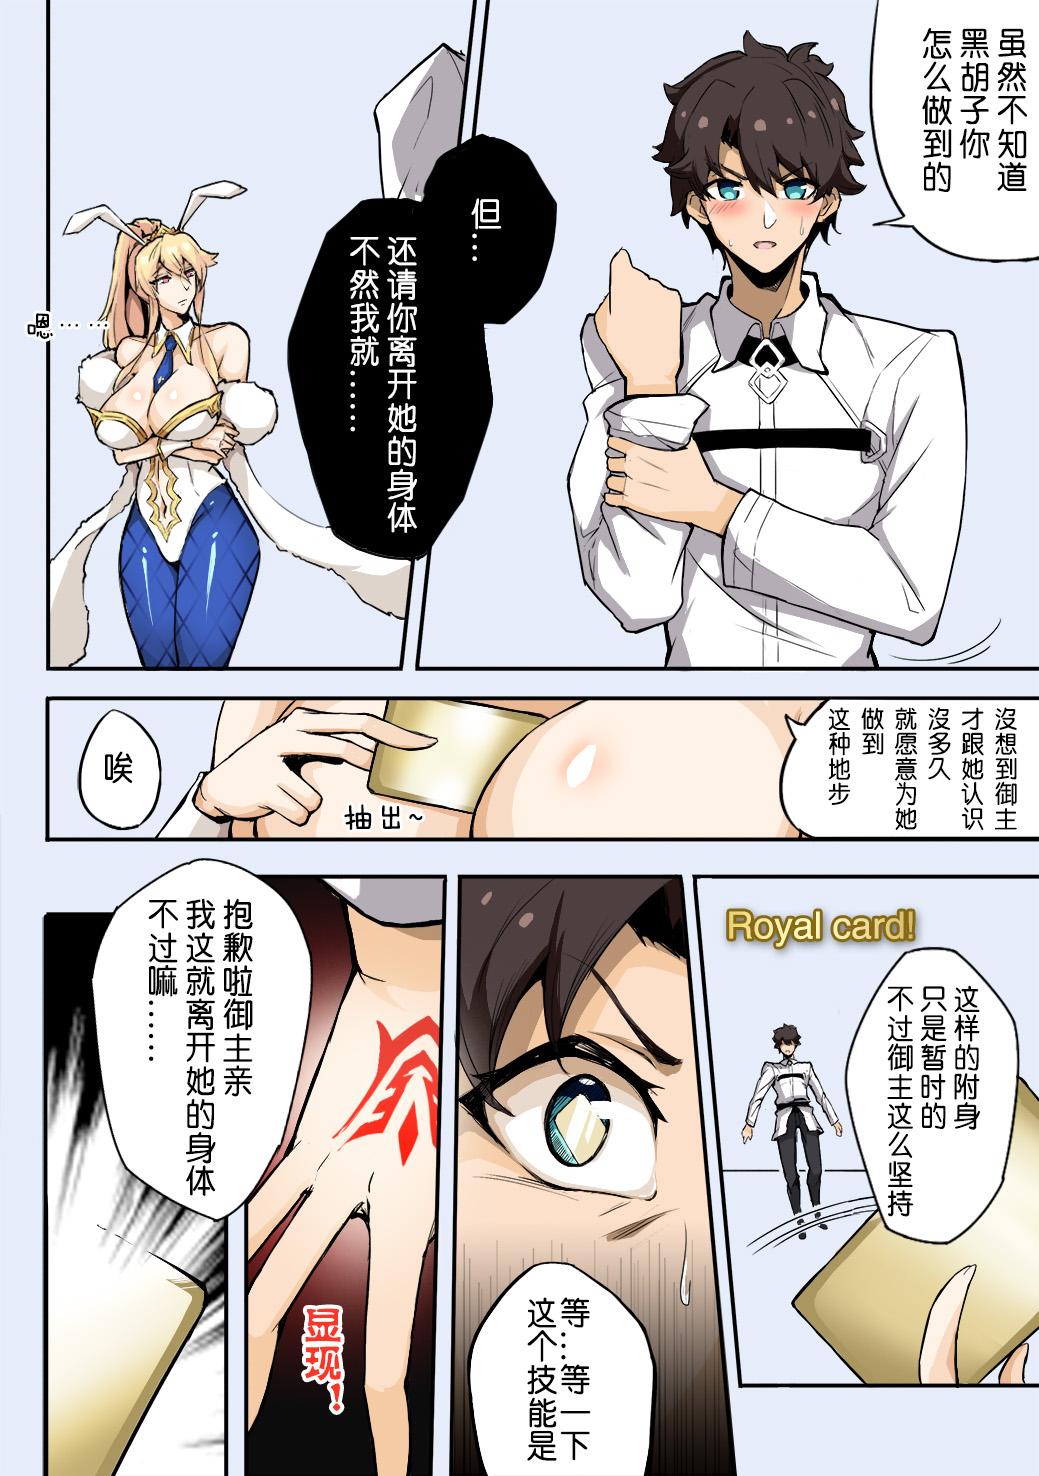 Ass Licking fate 黑胡子的阴谋 - Fate grand order Teen Sex - Page 6